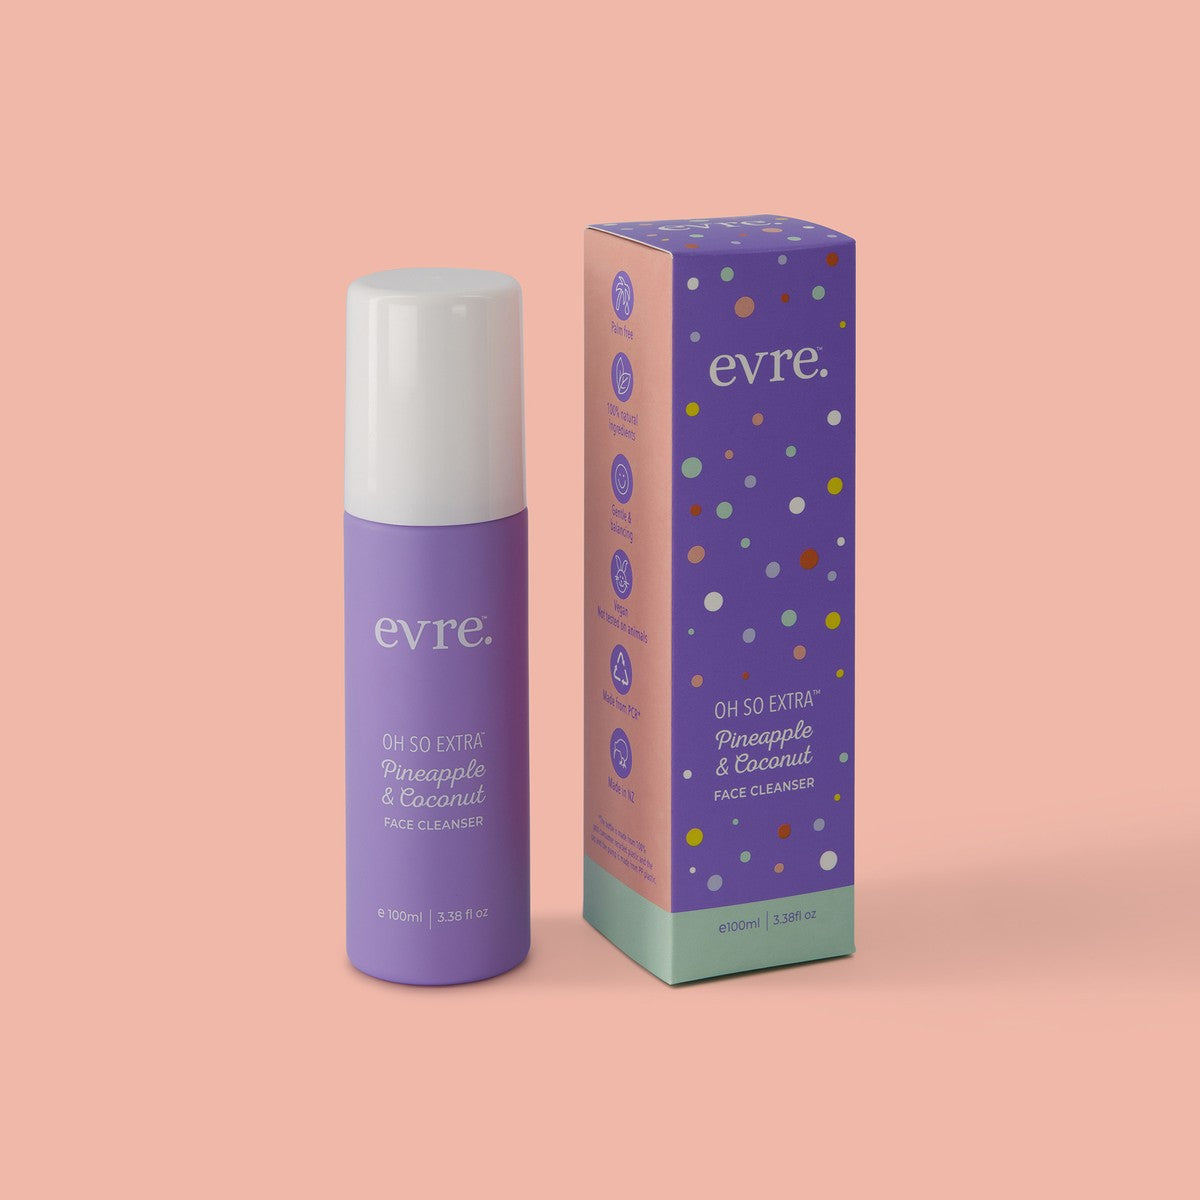 EVRE Pineapple & Coconut Face Cleanser